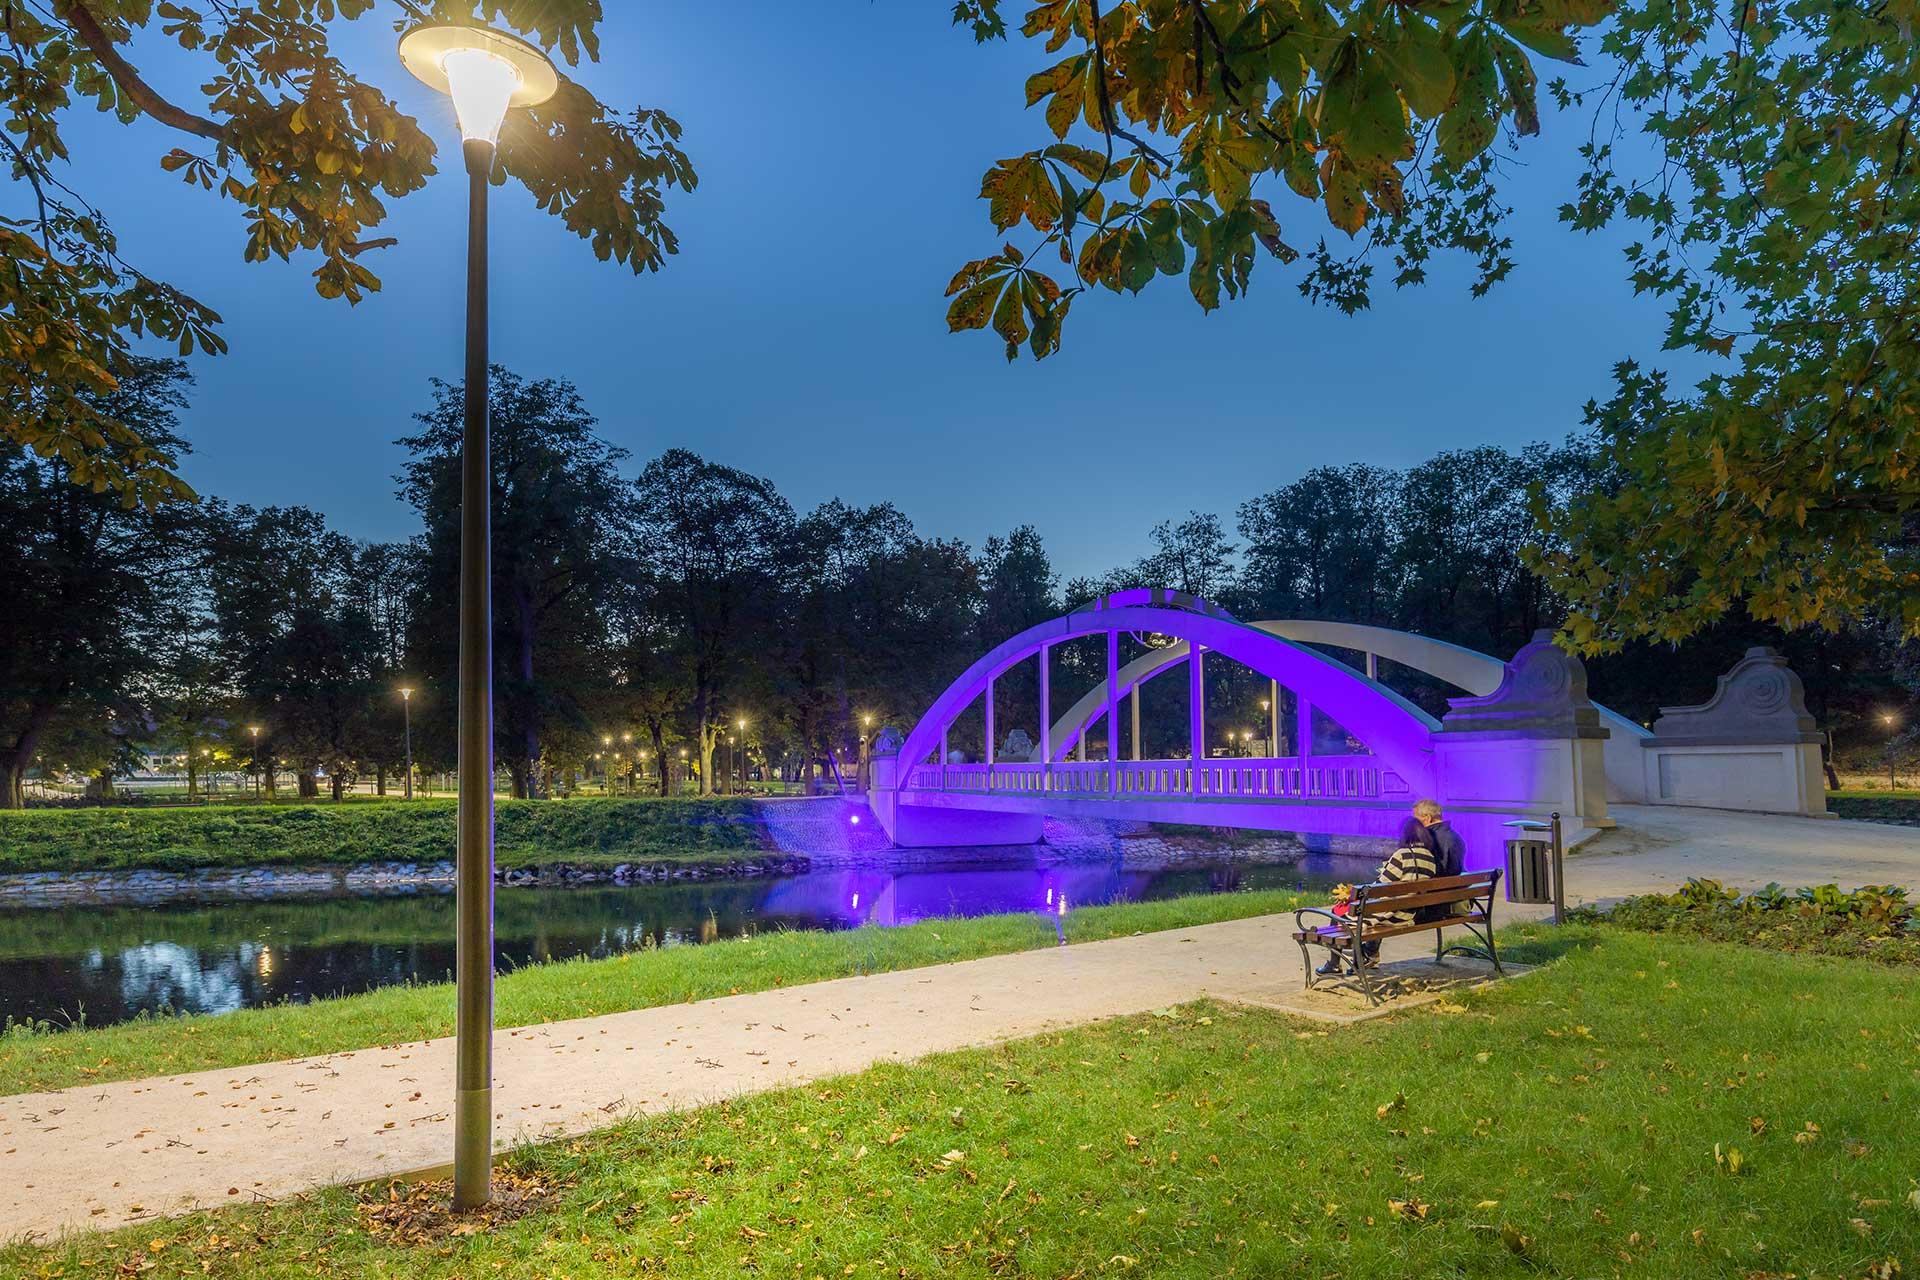 Pilzeo luminaires create a cosy ambiance for Central Park in Swidnica so residents can escape the city buzz and relax in this urban oasis